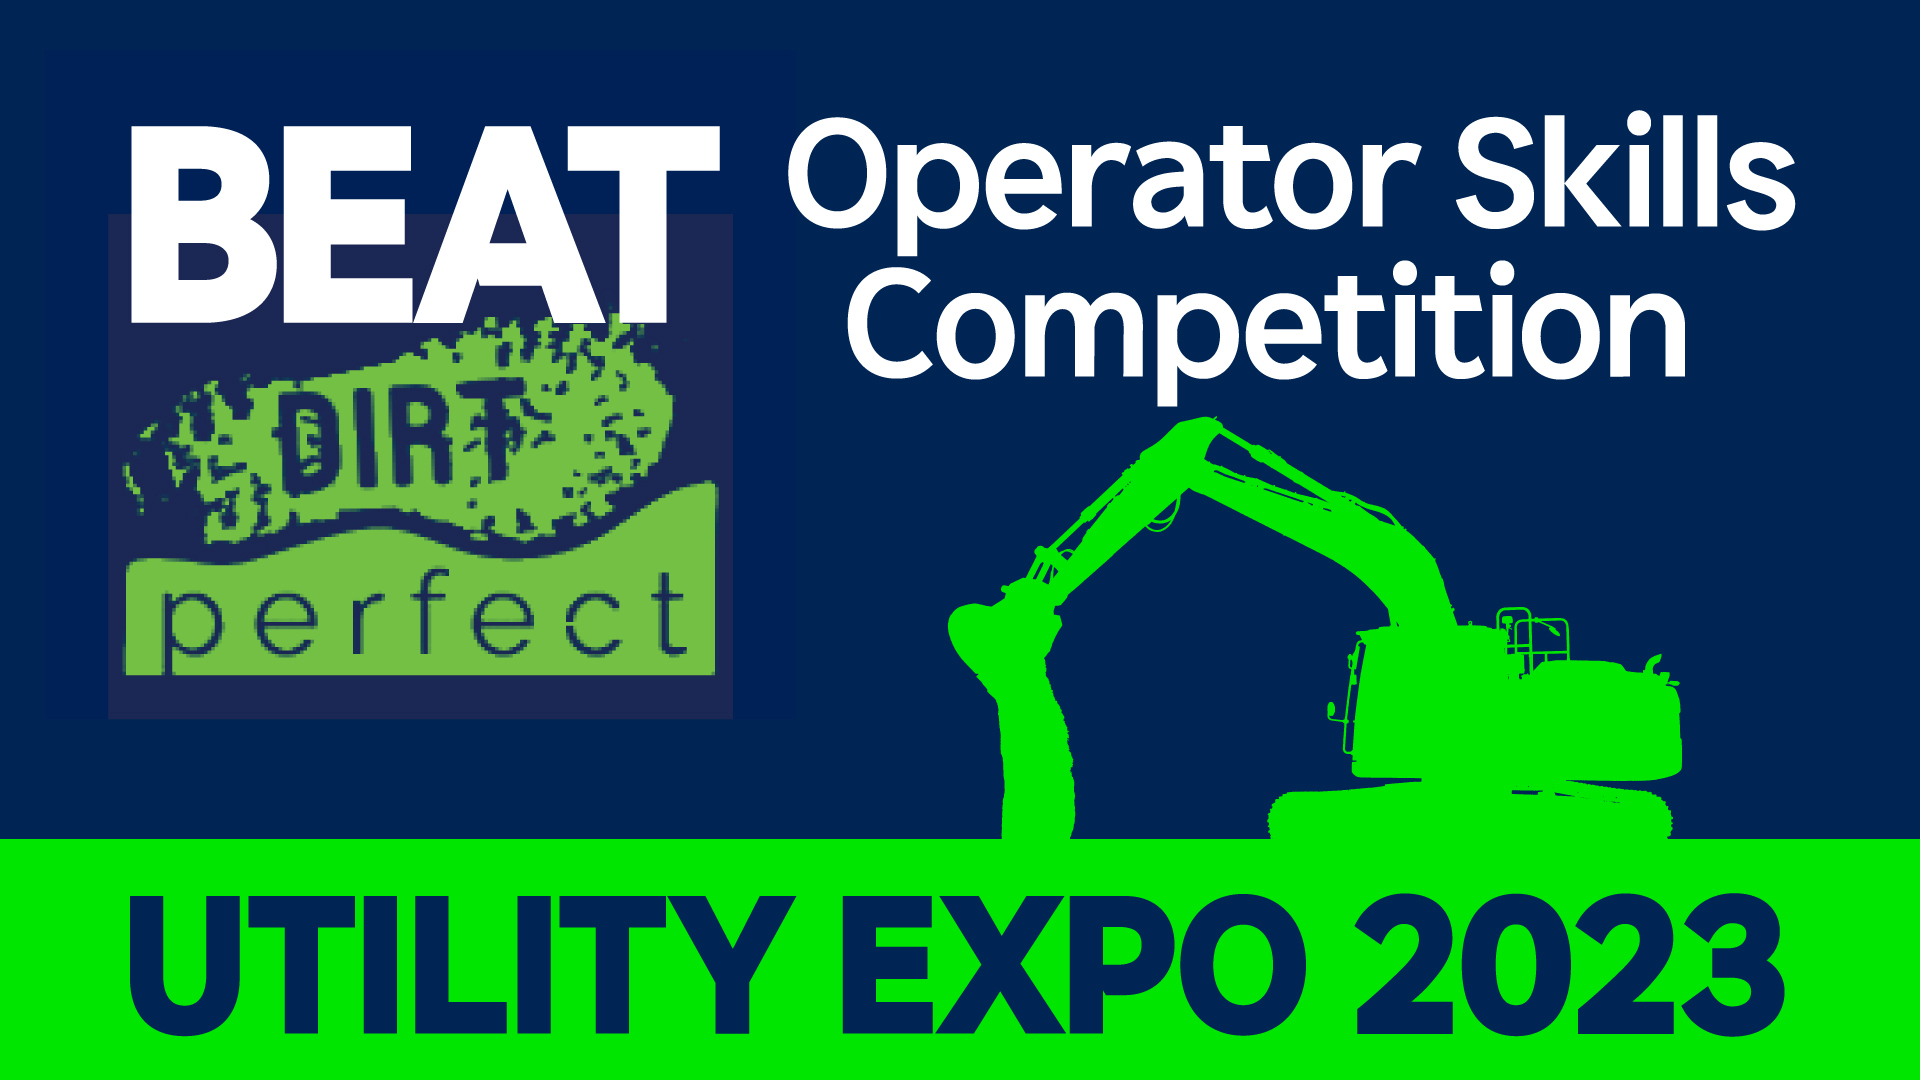 HYUNDAI PRESENTS “BEAT DIRT PERFECT” COMPETITION AT UTILITY EXPO